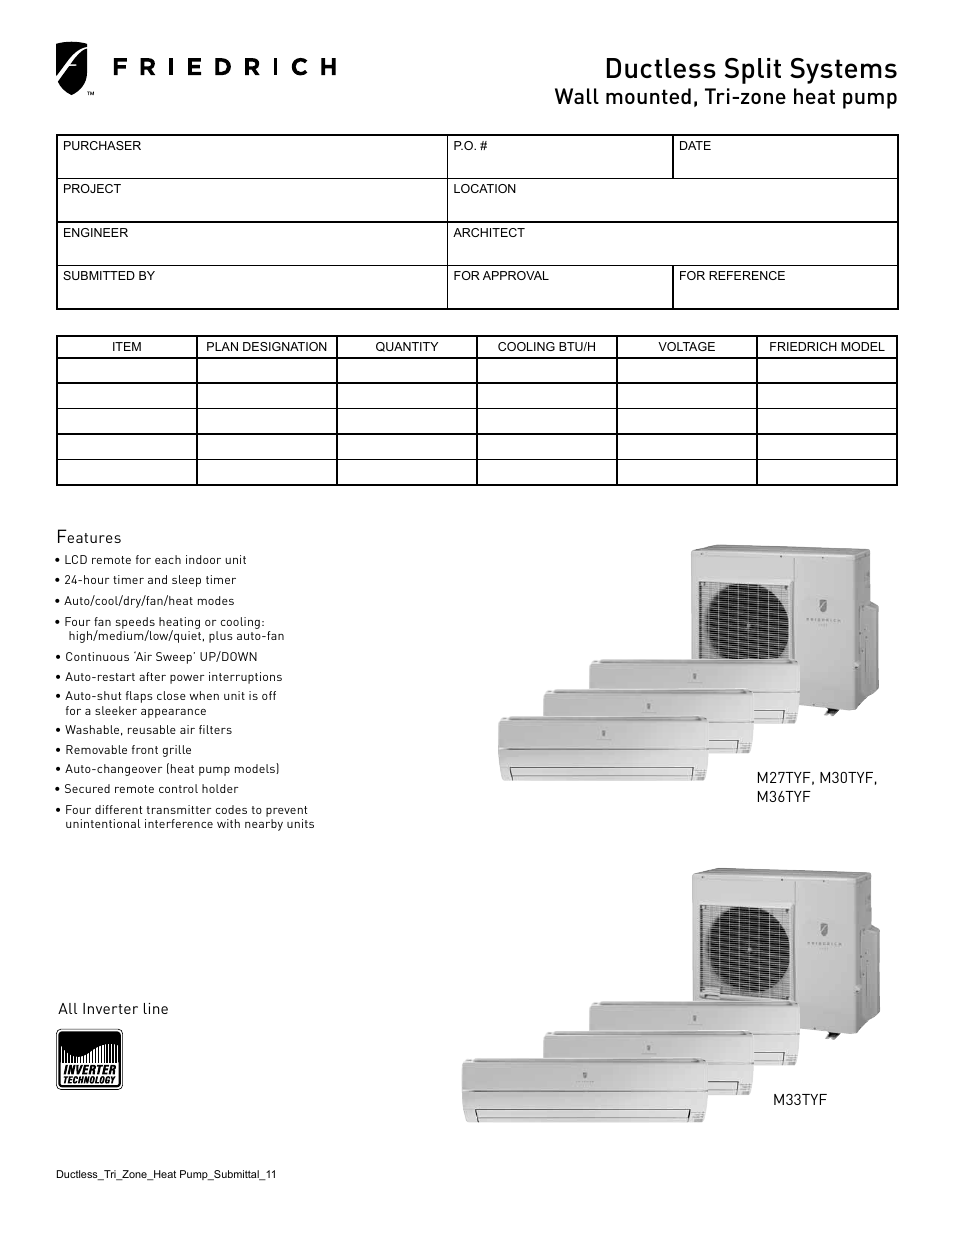 DUCTLESS SPLIT SYSTEMS M33TYF